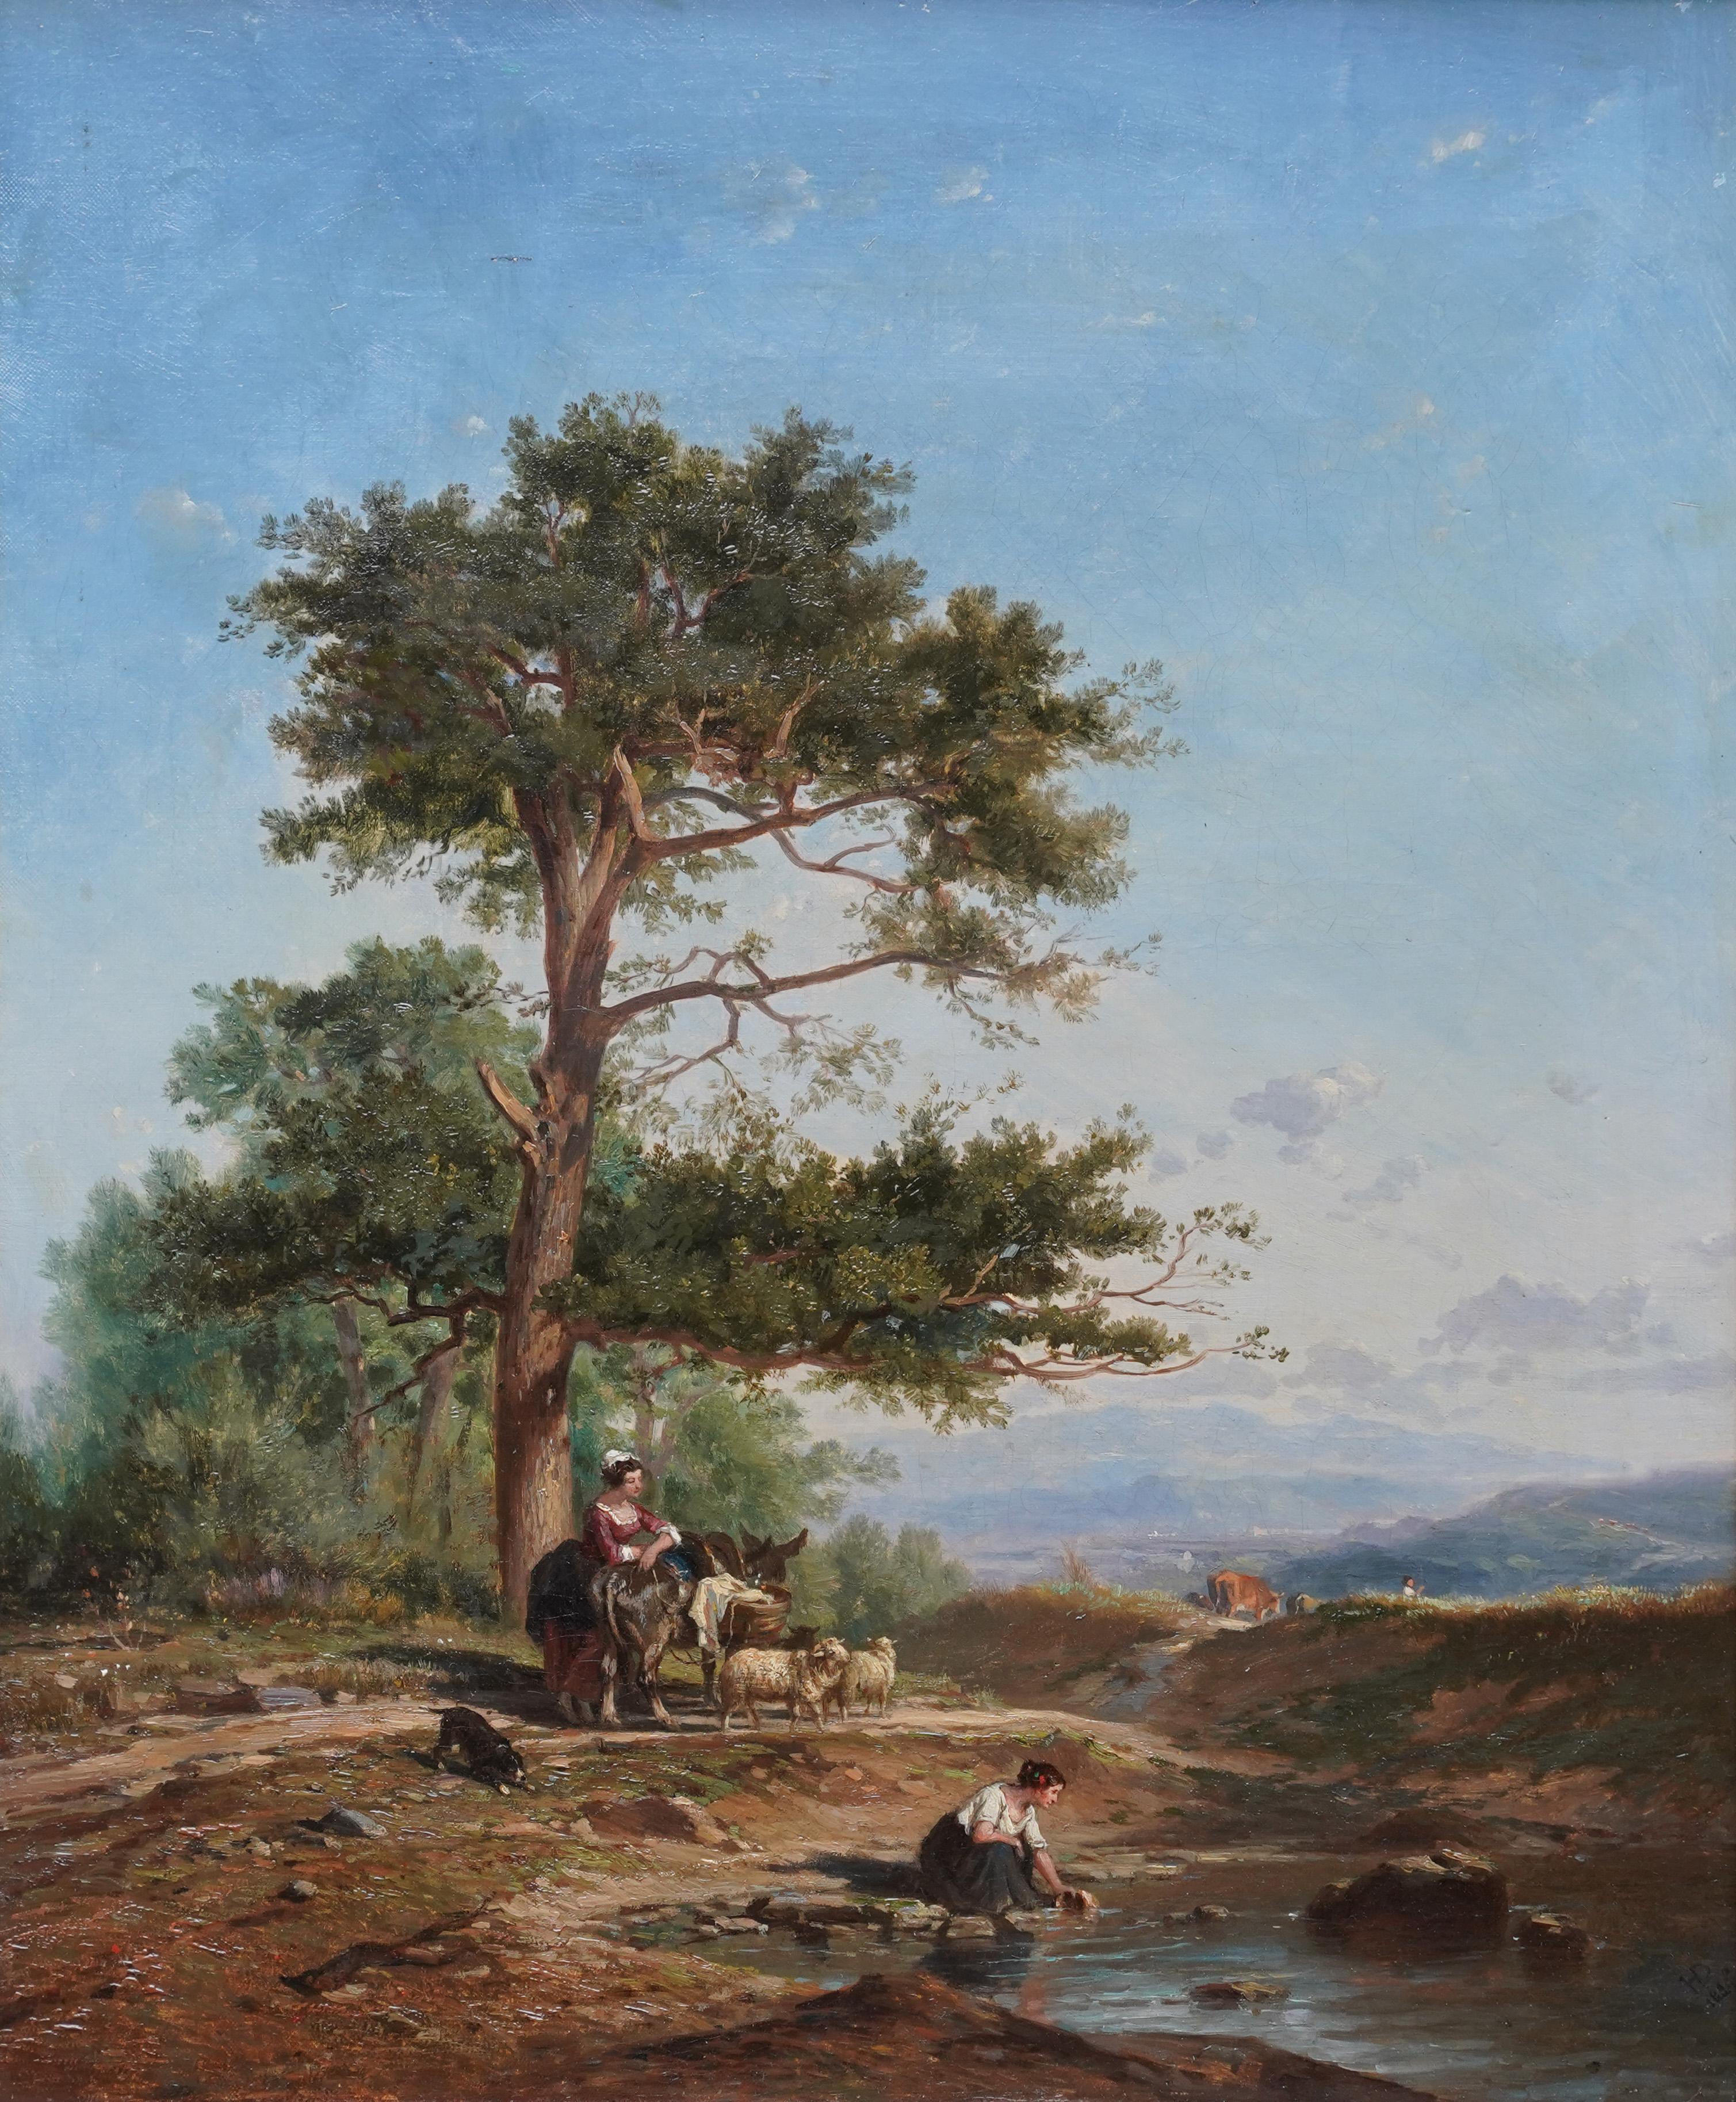 Women in a Landscape - British Victorian art figurative landscape oil painting - Painting by Henry Dawson